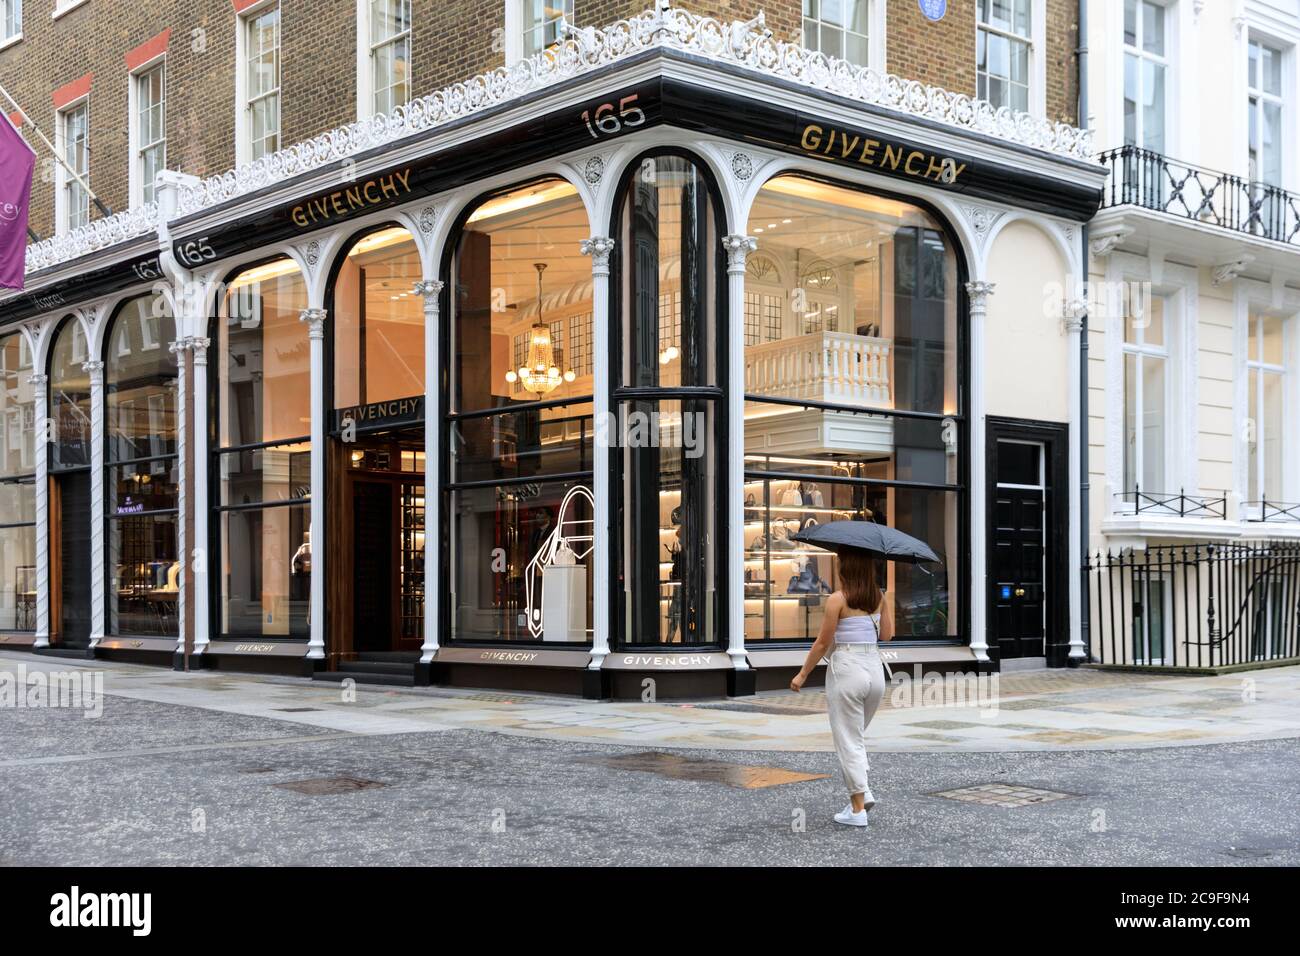 Givenchy luxury brand flagship store 